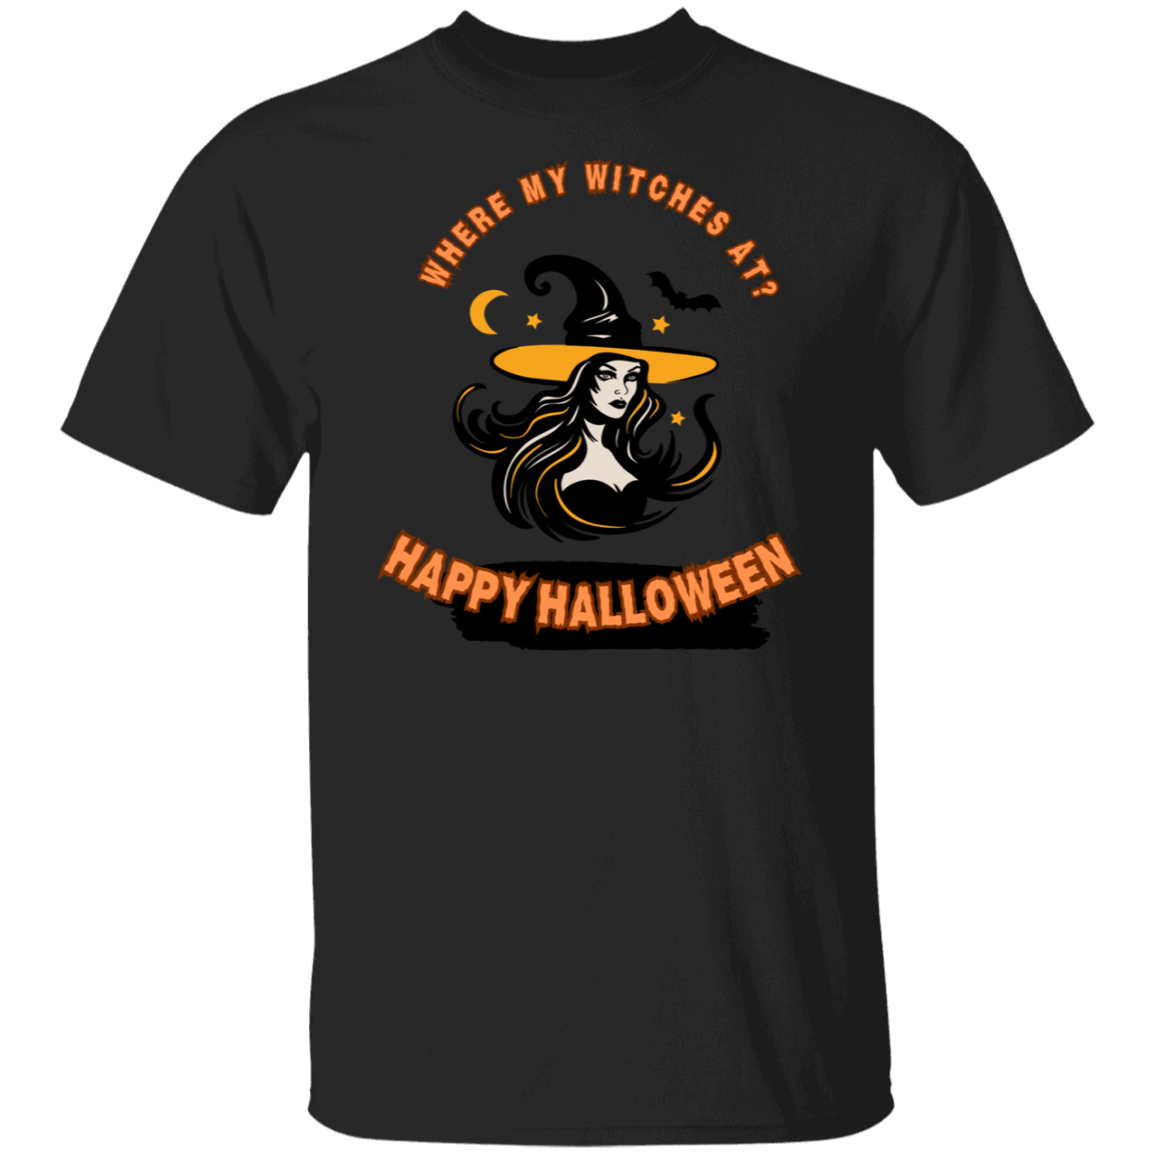 Where my Witches At? T-Shirt